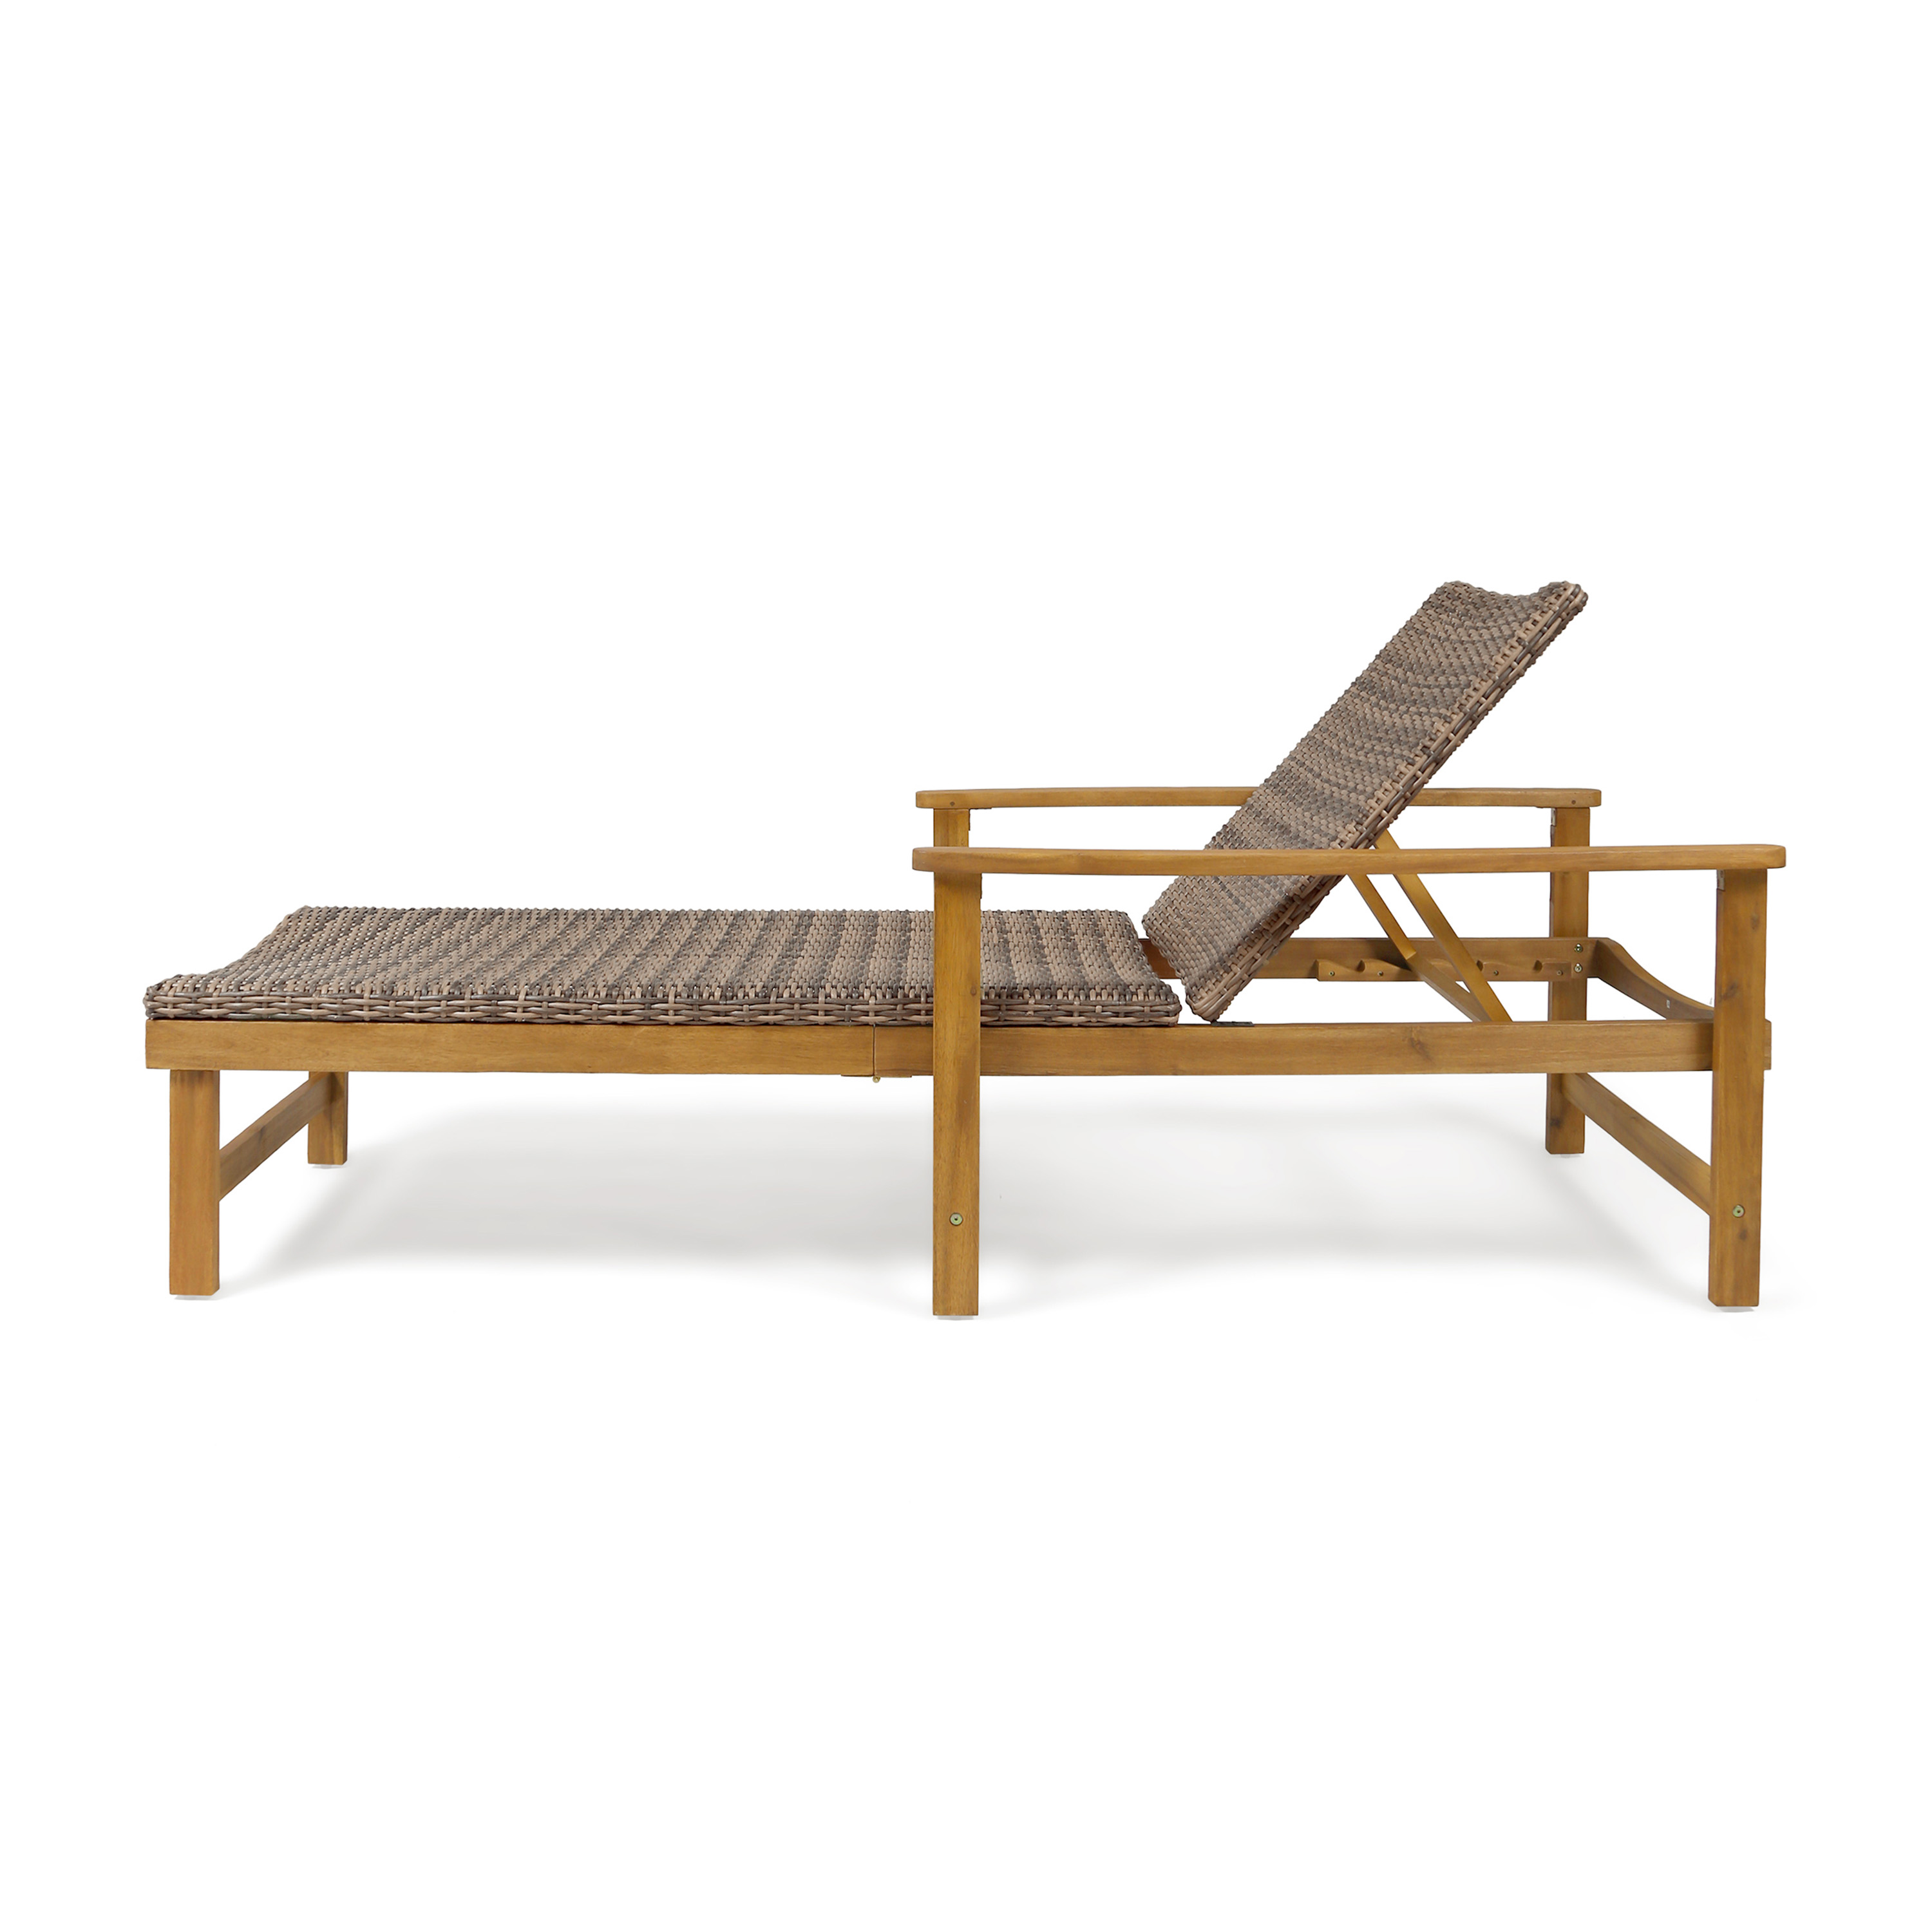 Kyle Outdoor Rustic Acacia Wood Chaise Lounge with Wicker Seating, Natural and Gray - image 5 of 8